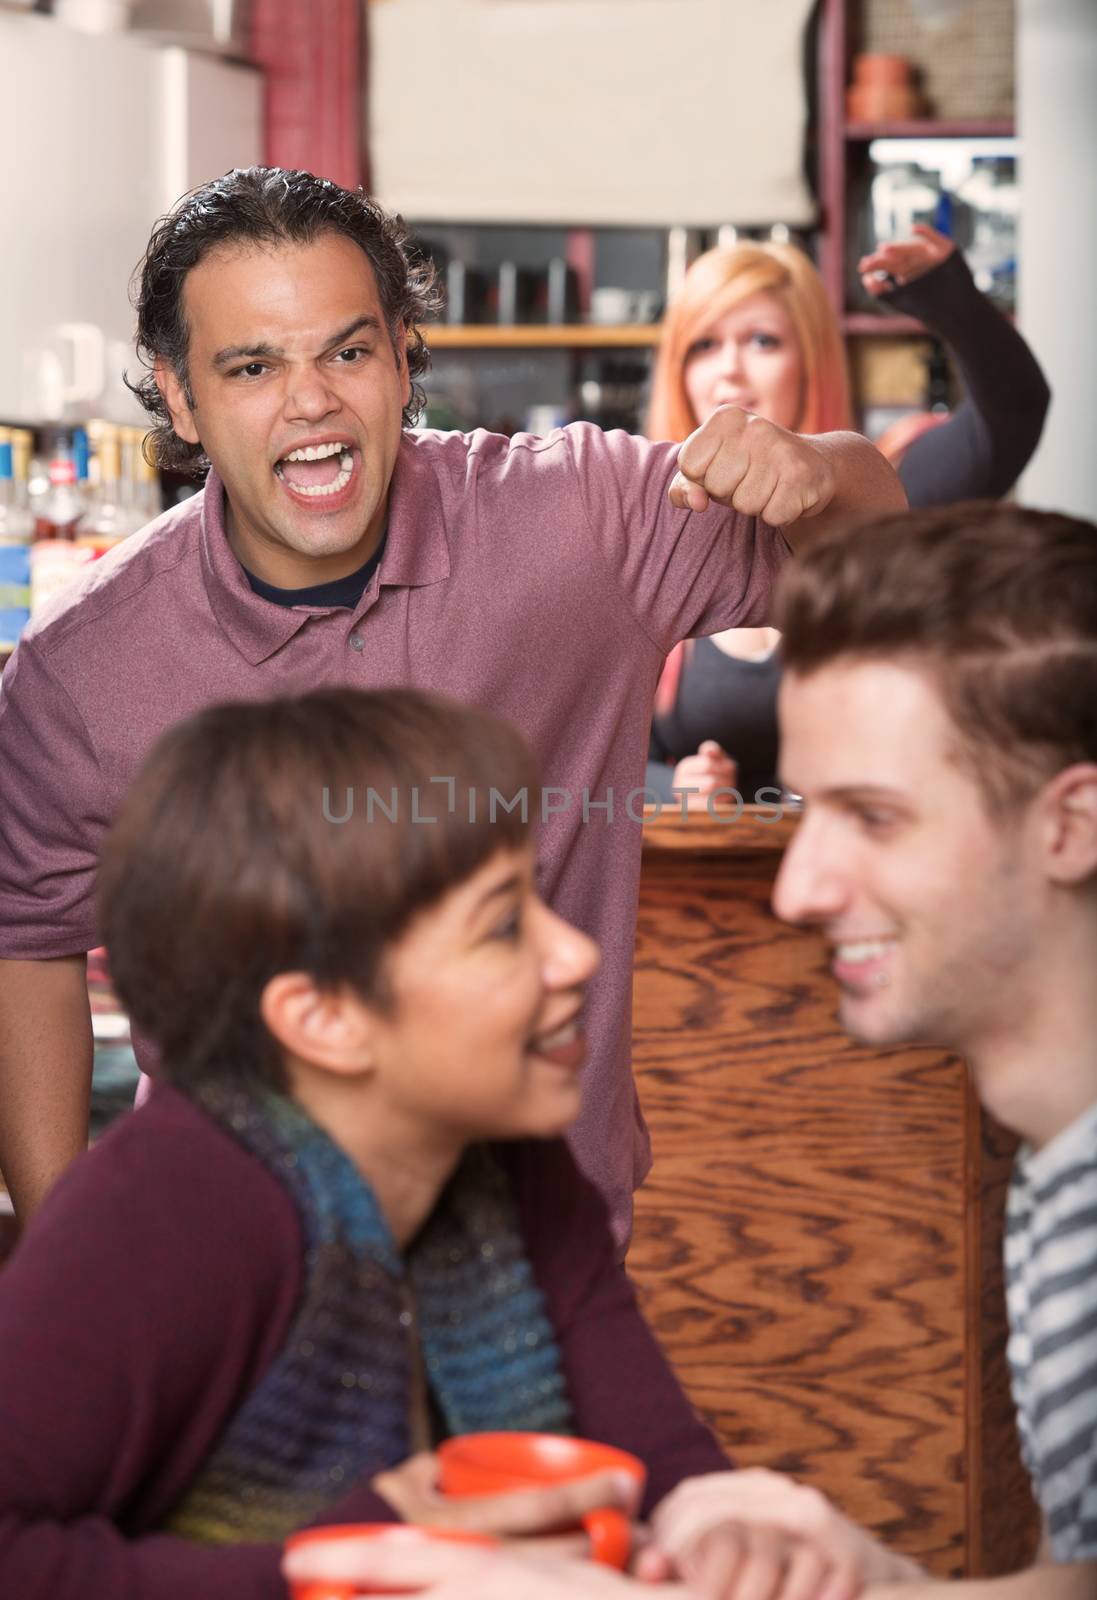 Hostile man with raised fist threatening loving couple in cafe